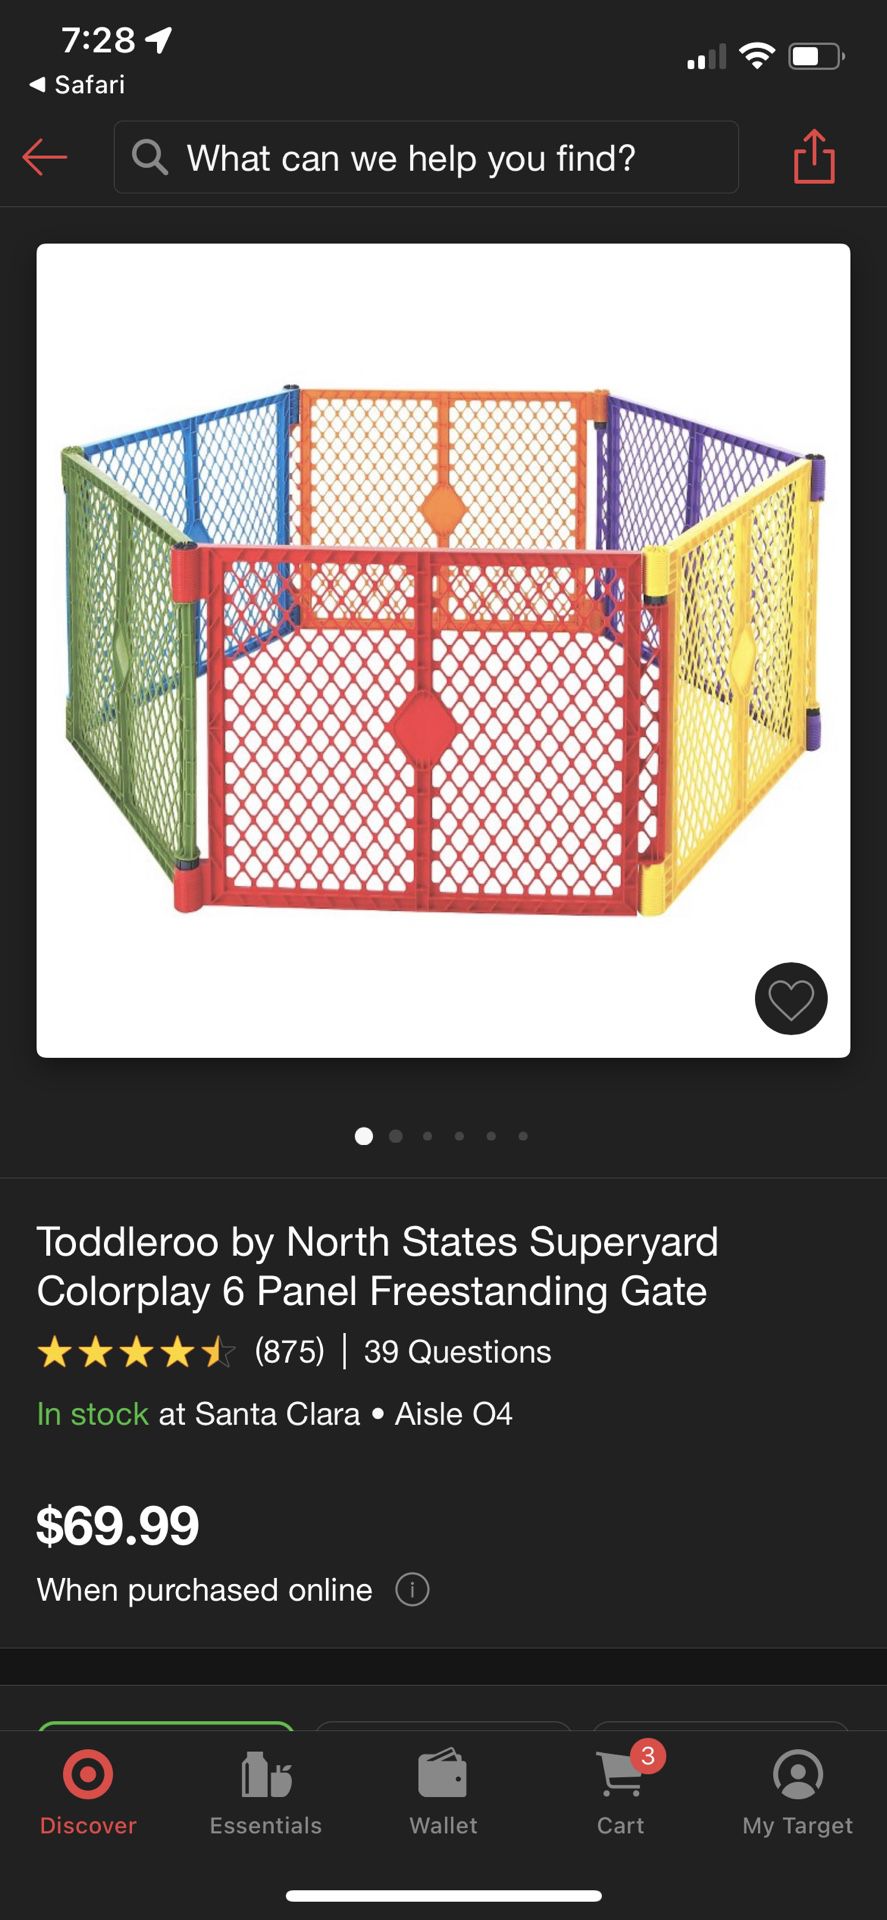 Playpen: Toddleroo by North States Superyard Colorplay 6 Panel Freestanding Gate